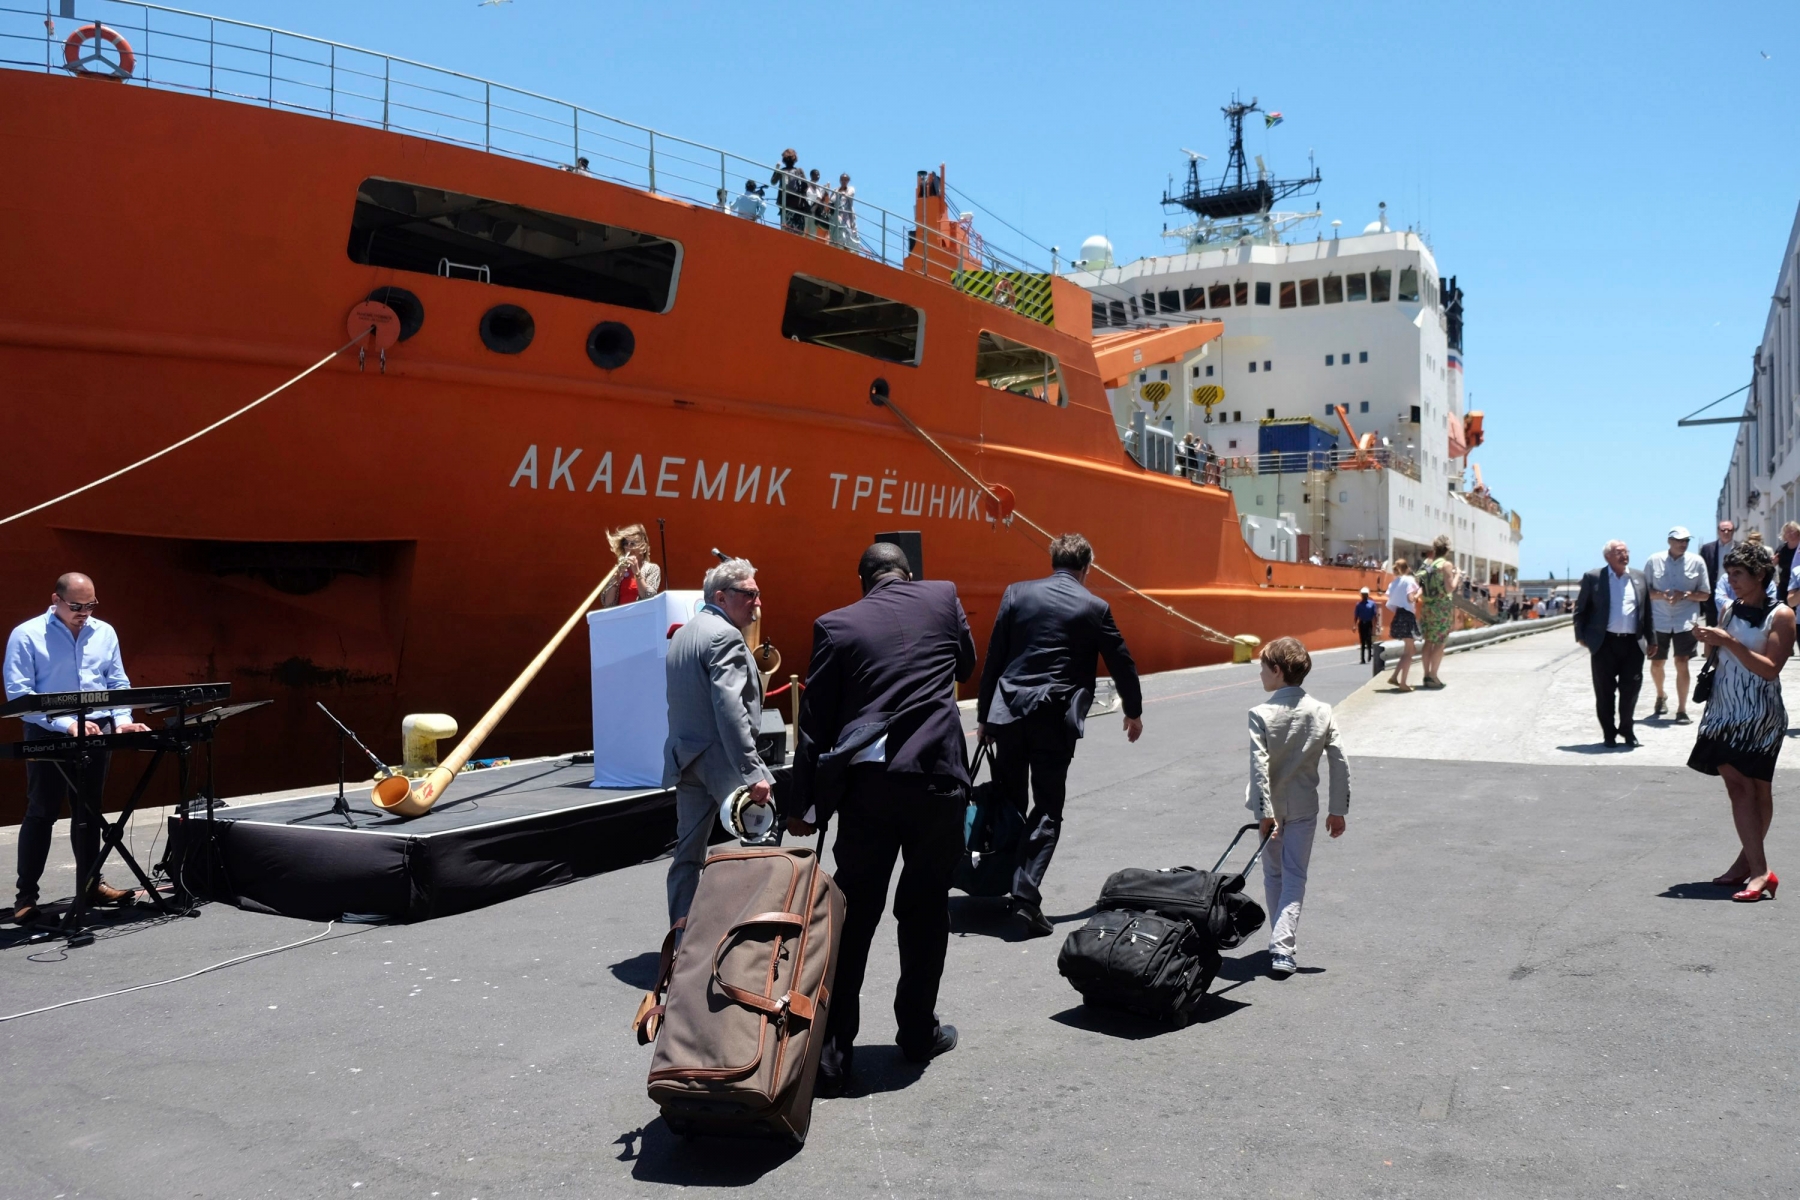 Team members arrive with luggage to board the Akademik Treshnikov, a Russian research vessel, in Cape Town, South Africa, Tuesday, Dec. 20, 2016 prior it's departure for the Antactic. It's aim is to study the earth's poles and extreme environments and to explore crucial issues that the scientific and political communities face in the area of climate change. The vessel will carry 55 researchers from 18 countries. (AP Photo/Dean Hutton) South Africa Antarctica Circumnavigation Expedition